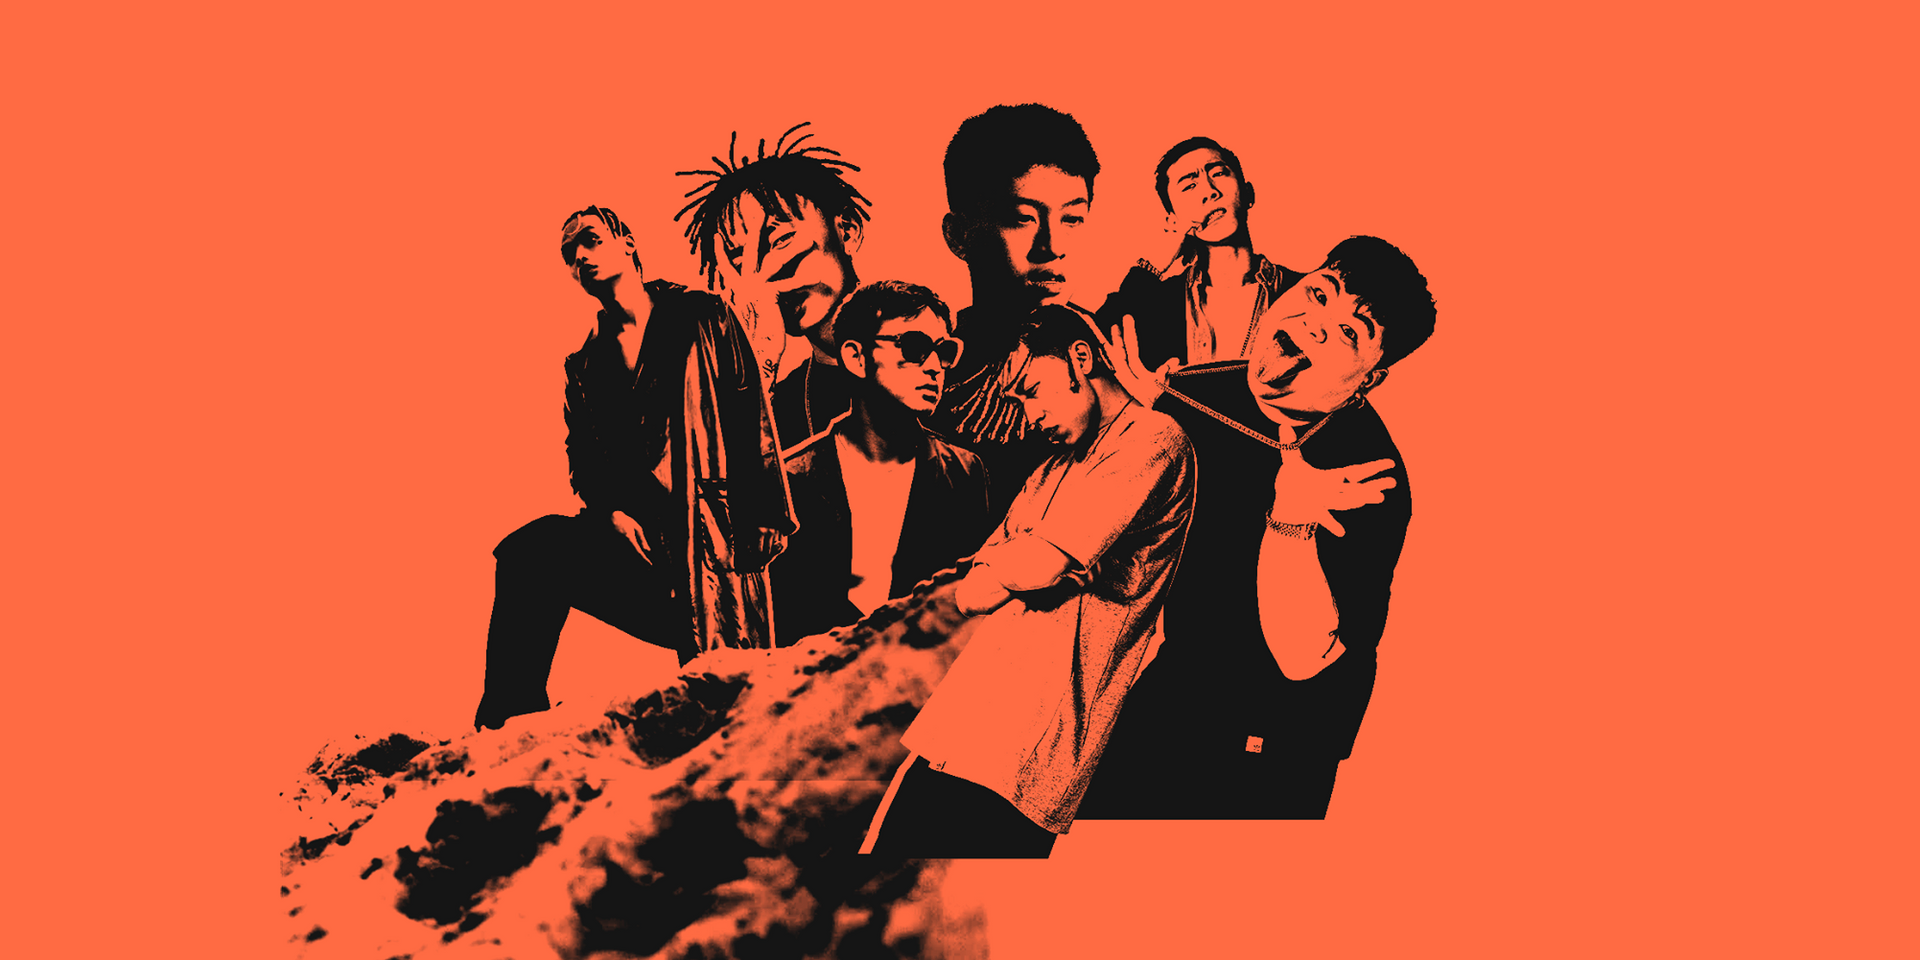 88rising are taking over Asia with a full tour — Rich Chigga, Joji, Keith Ape, Higher Brothers